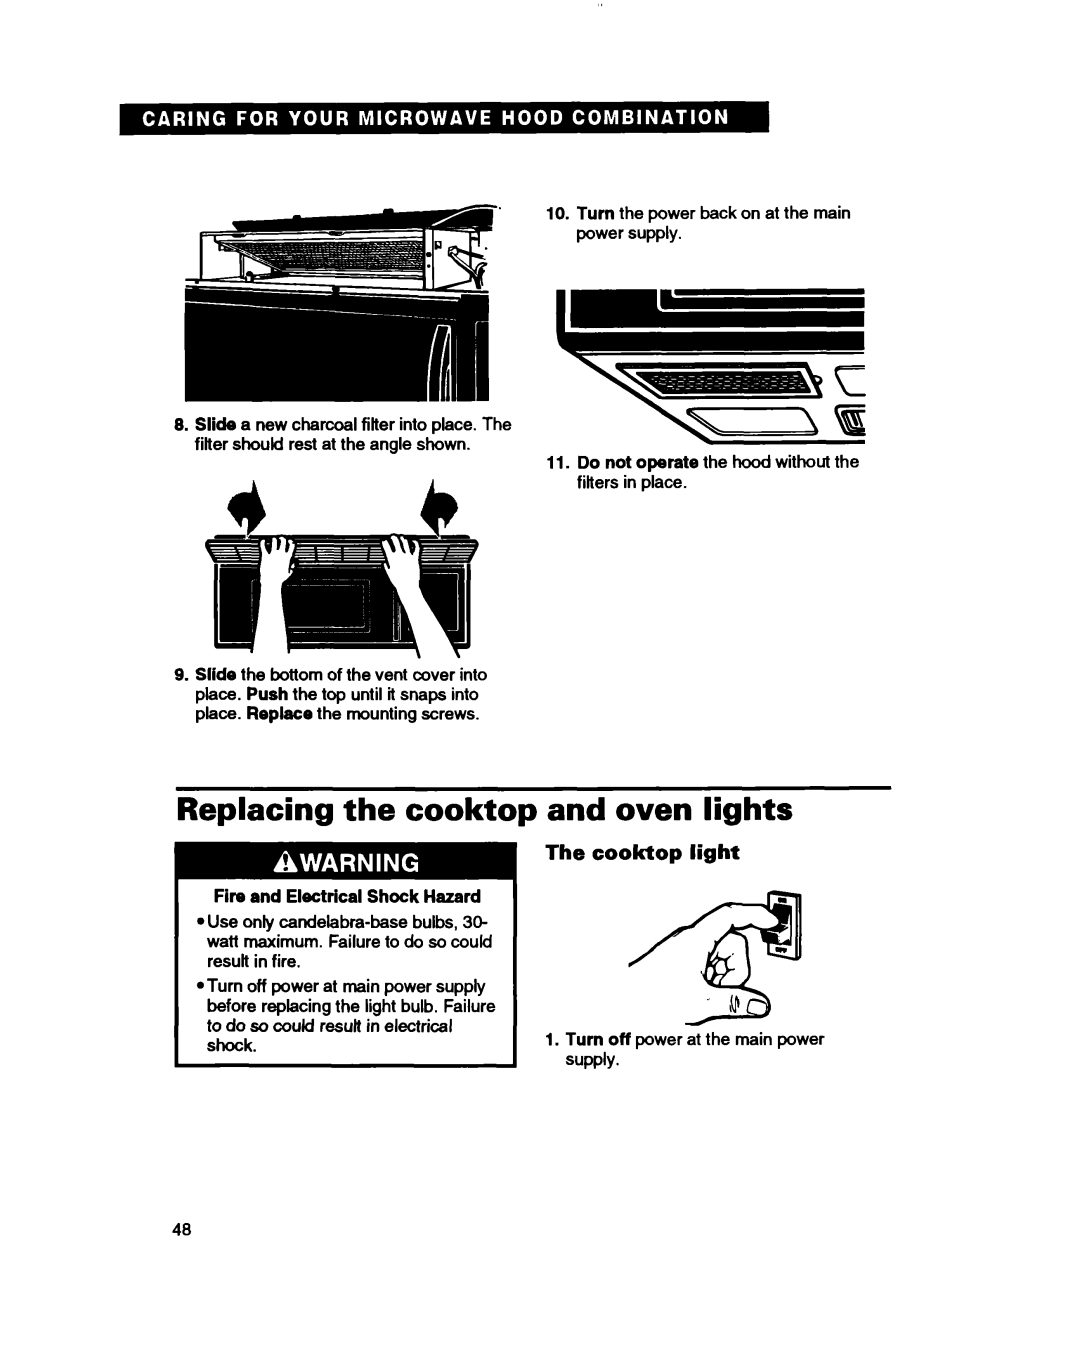 Whirlpool MH7110XB warranty Replacing the cooktop, and oven lights, The cooktop light, I ” 9i!J?s 